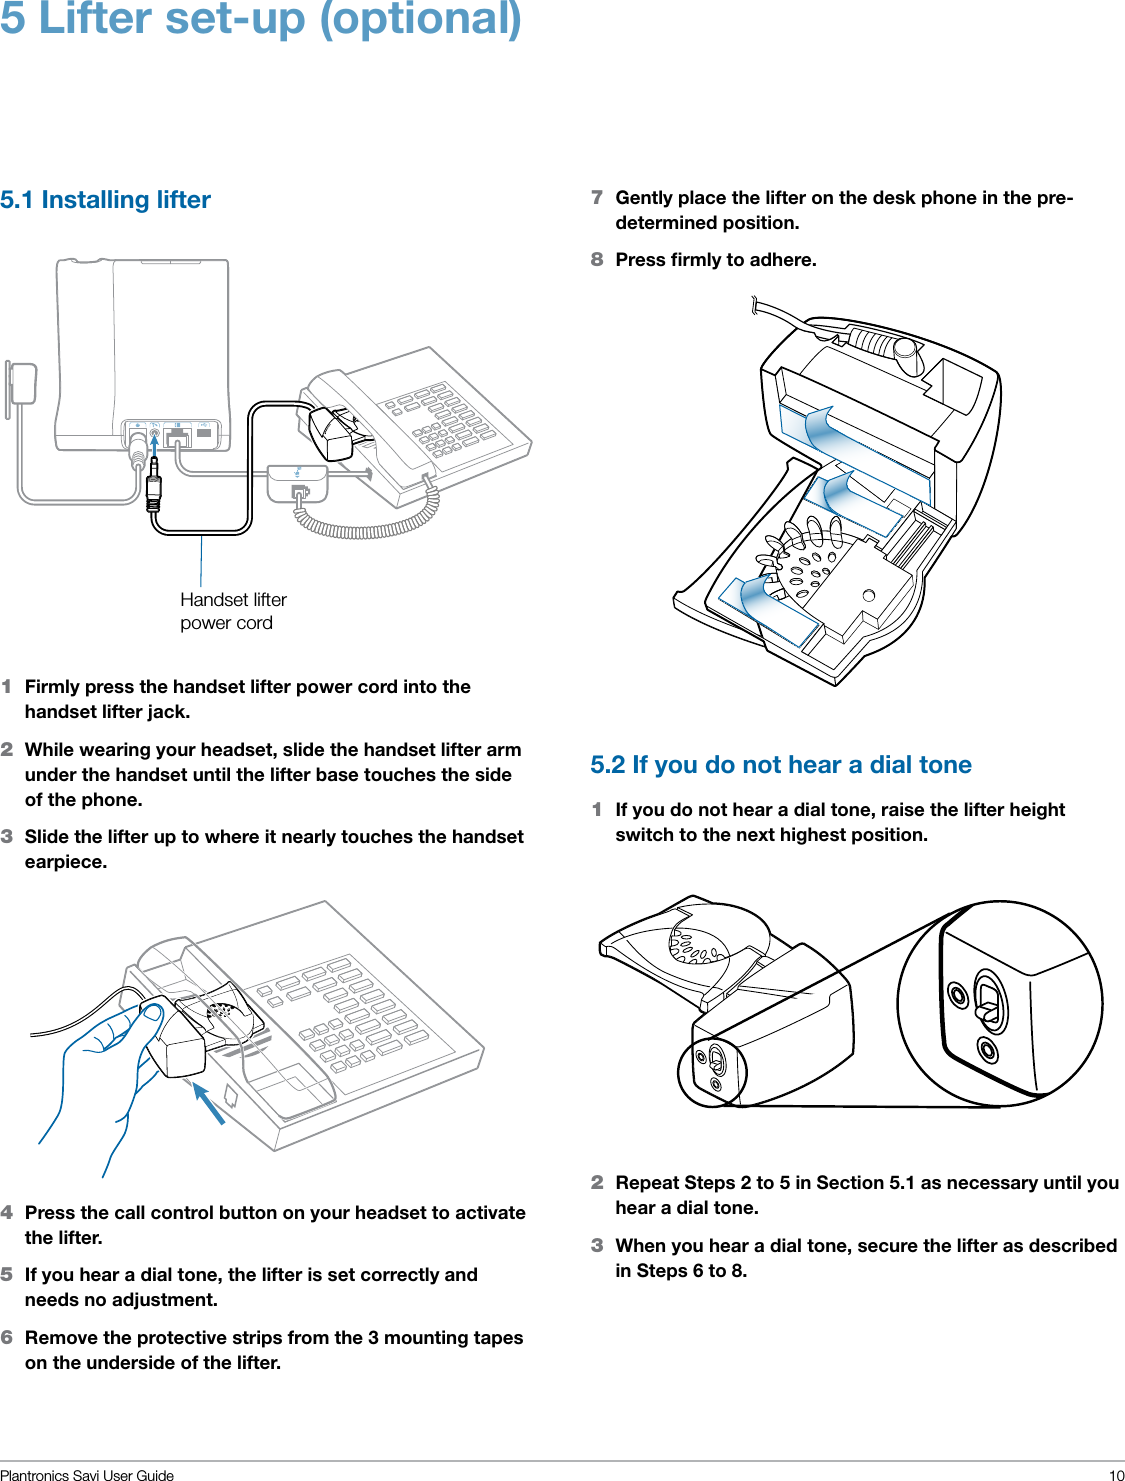 Plantronics Savi User Guide 105 Lifter set-up (optional)5.1 Installing lifter 5.2 If you do not hear a dial tone 1  If you do not hear a dial tone, raise the lifter height switch to the next highest position.1  Firmly press the handset lifter power cord into the handset lifter jack.2  While wearing your headset, slide the handset lifter arm under the handset until the lifter base touches the side of the phone. 3  Slide the lifter up to where it nearly touches the handset earpiece.7  Gently place the lifter on the desk phone in the pre-determined position.8  Press ﬁrmly to adhere.Handset lifter power cord2  Repeat Steps 2 to 5 in Section 5.1 as necessary until you hear a dial tone. 3  When you hear a dial tone, secure the lifter as described in Steps 6 to 8.4  Press the call control button on your headset to activate the lifter.5  If you hear a dial tone, the lifter is set correctly and needs no adjustment. 6  Remove the protective strips from the 3 mounting tapes on the underside of the lifter.